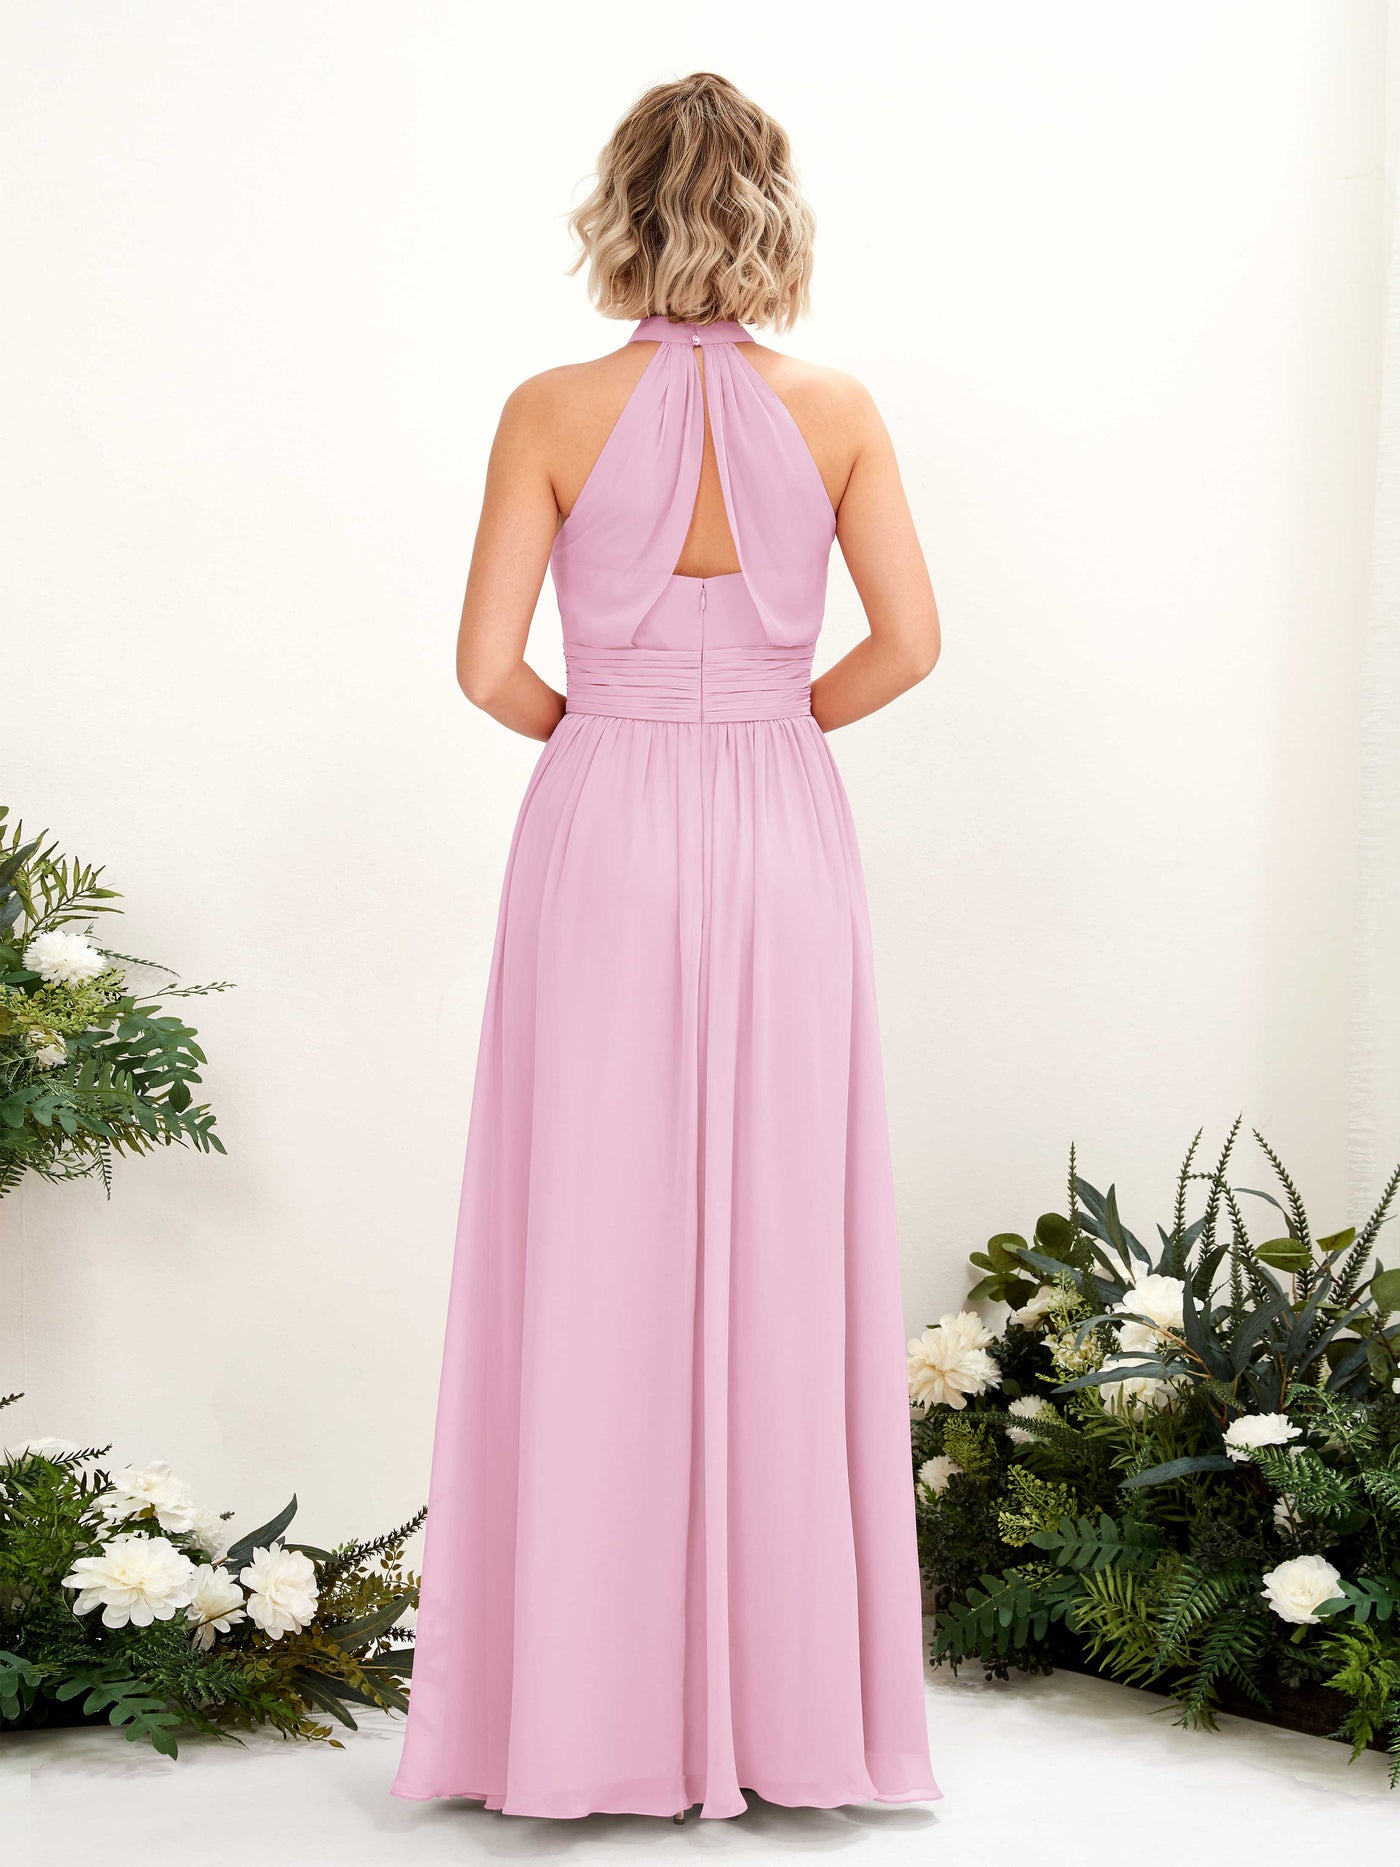 Candy Pink Bridesmaid Dresses Bridesmaid Dress A-line Chiffon Halter Full Length Sleeveless Wedding Party Dress (81225339)#color_candy-pink